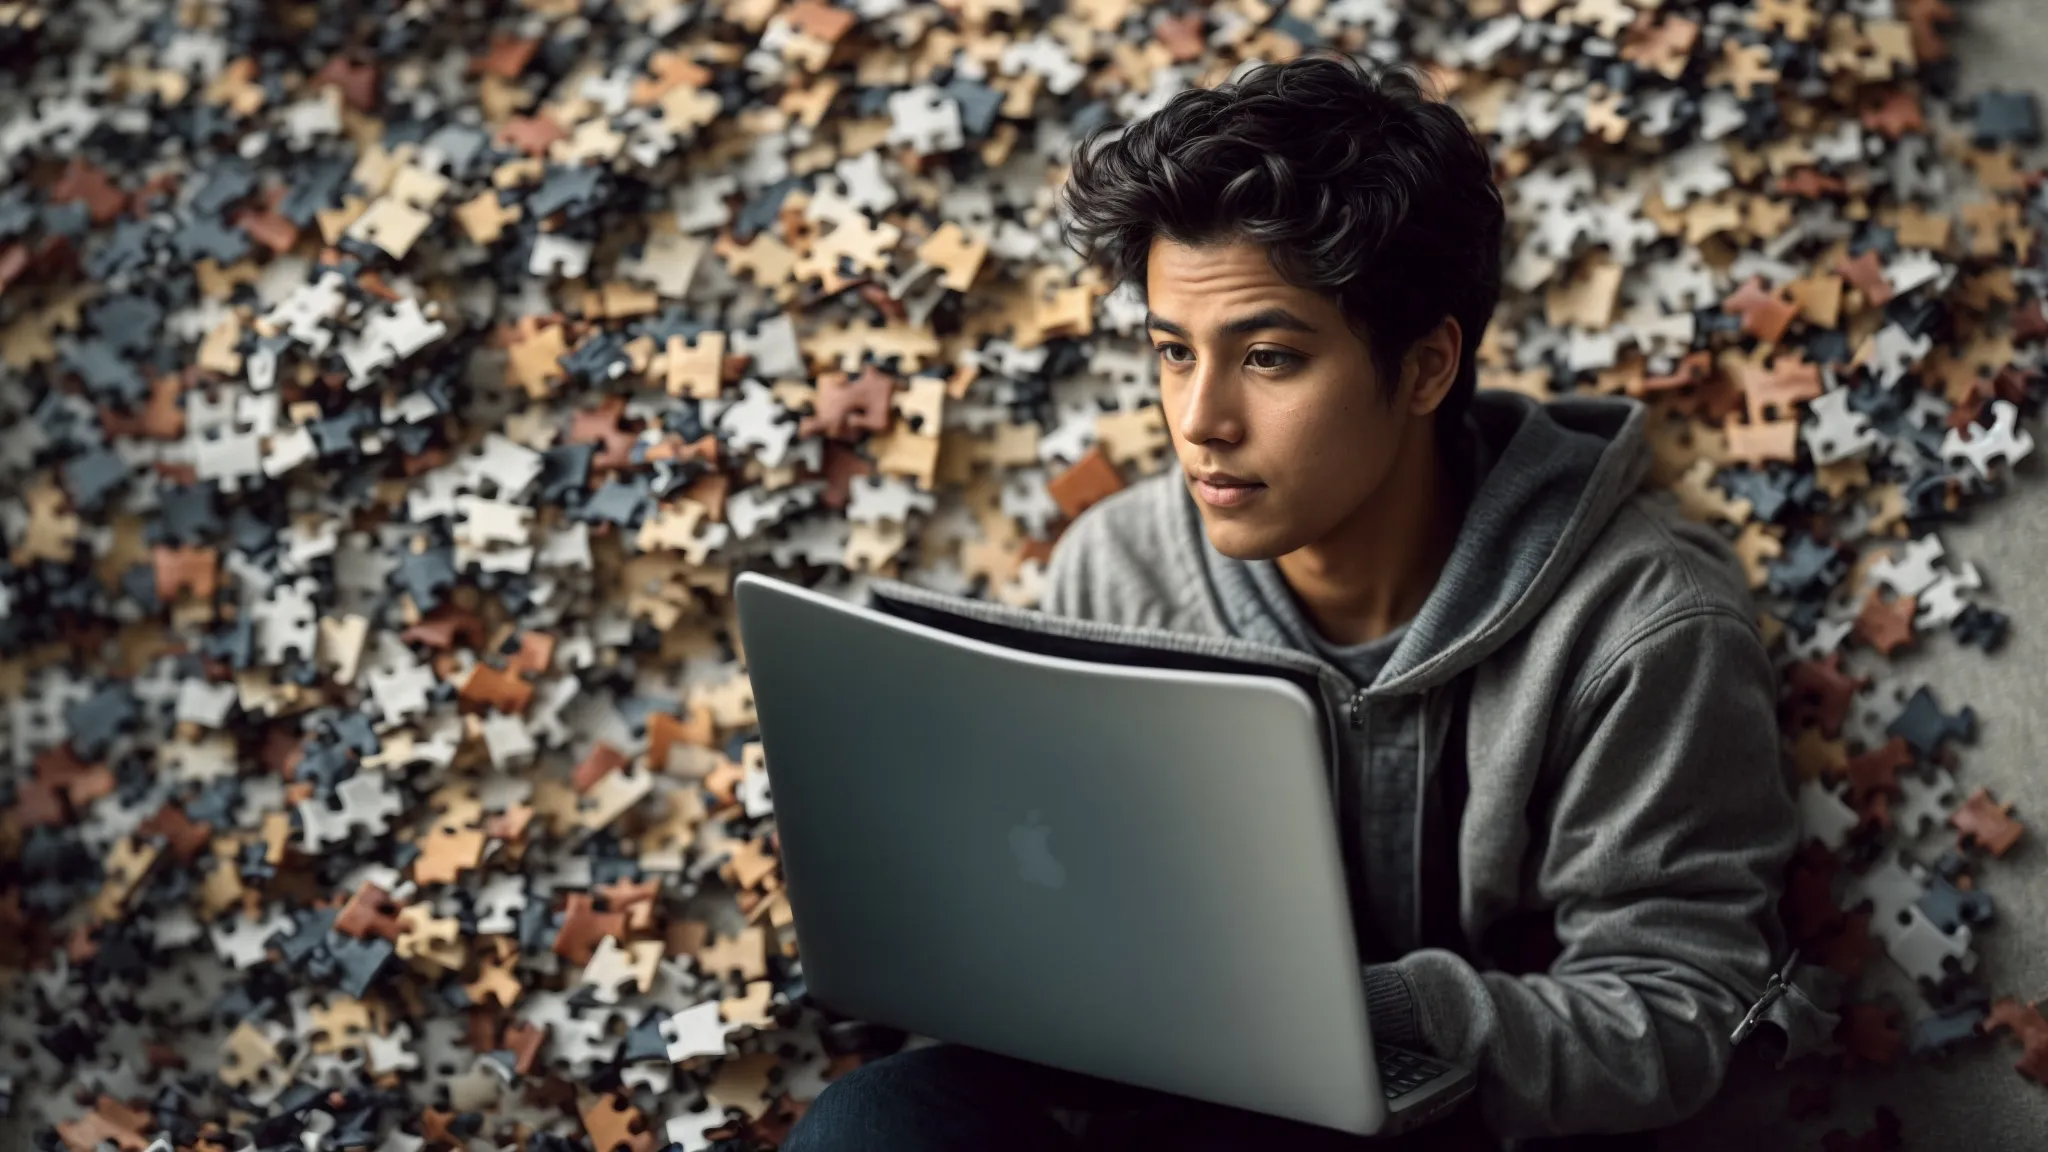 a puzzled person staring at a computer screen displaying a chaotic mishmash of unrelated website search results.